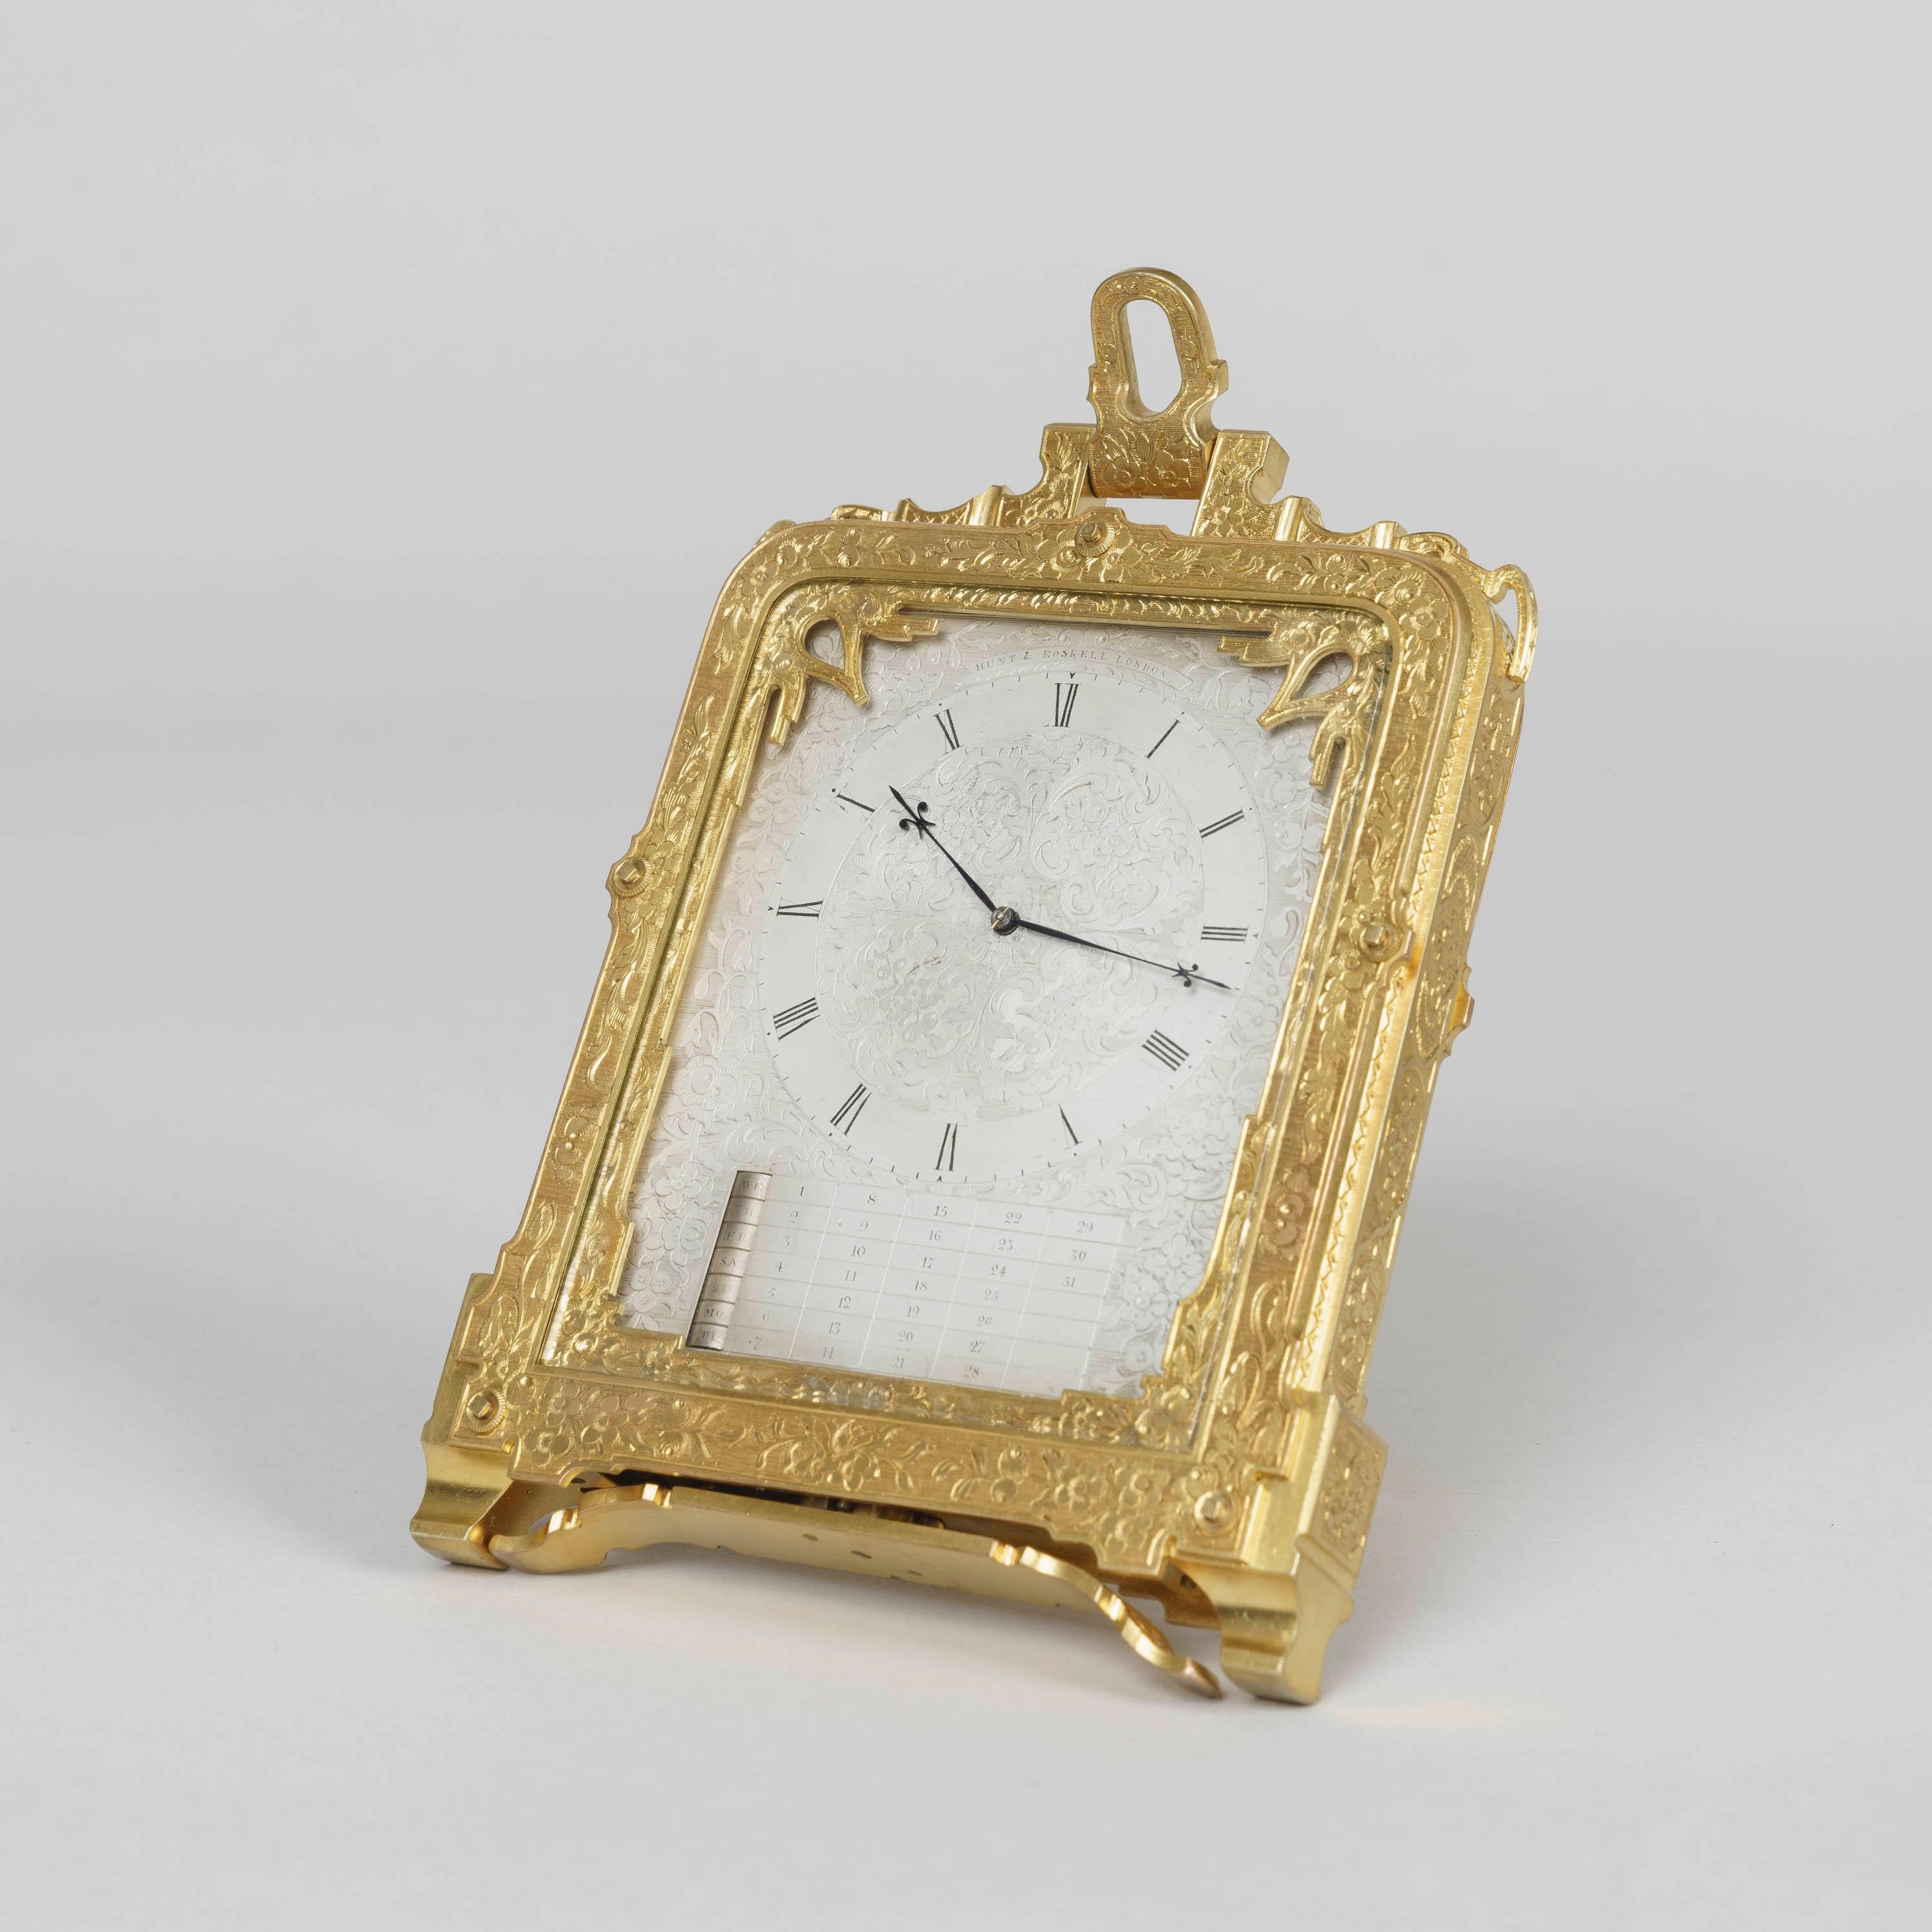 A very early strut clock
Retailed by Hunt & Roskell
By Thomas Cole

A rare pre-numbered strut clock of beautiful design and execution, having the standard revolving strut attachment to the base for support, a spring-loaded catch-operated bracket